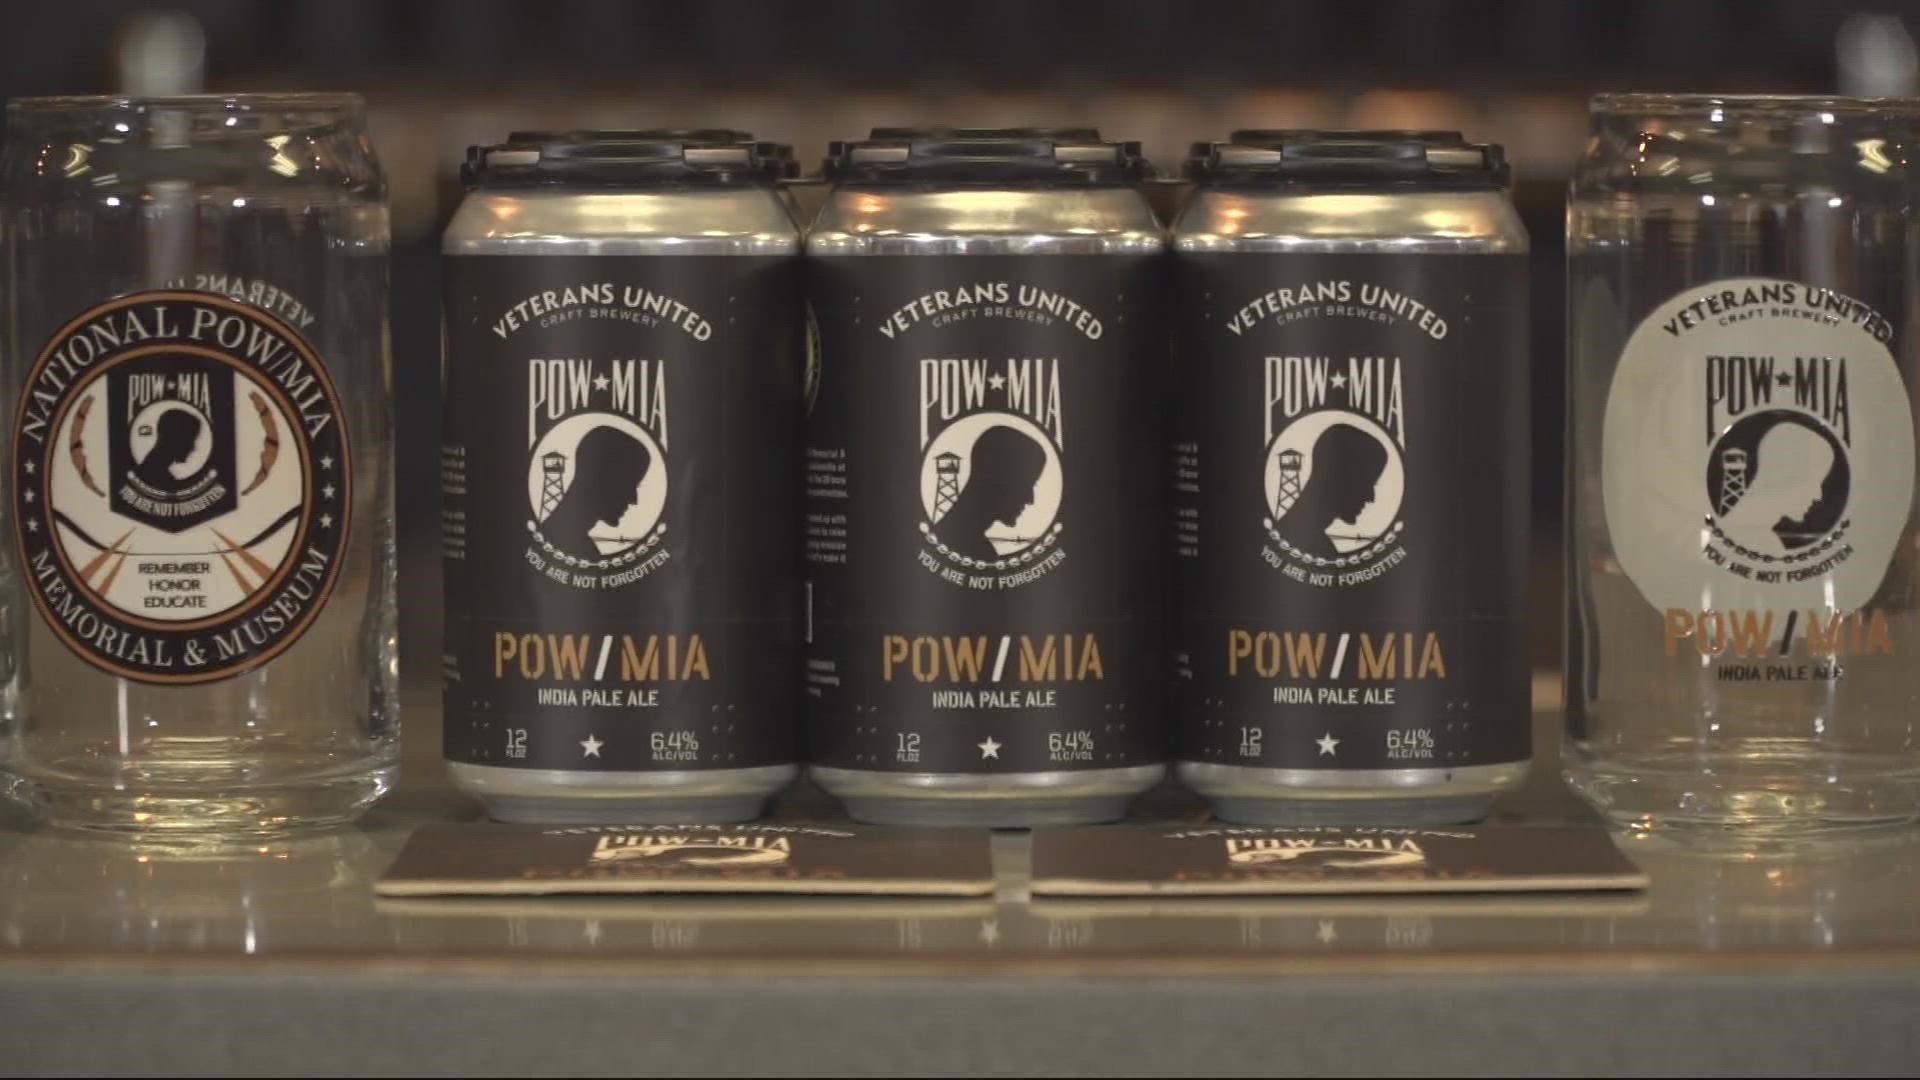 A portion of the beer sales will go to the National POW/MIA Memorial and Museum at former Naval Air Station Cecil Field in Jacksonville.